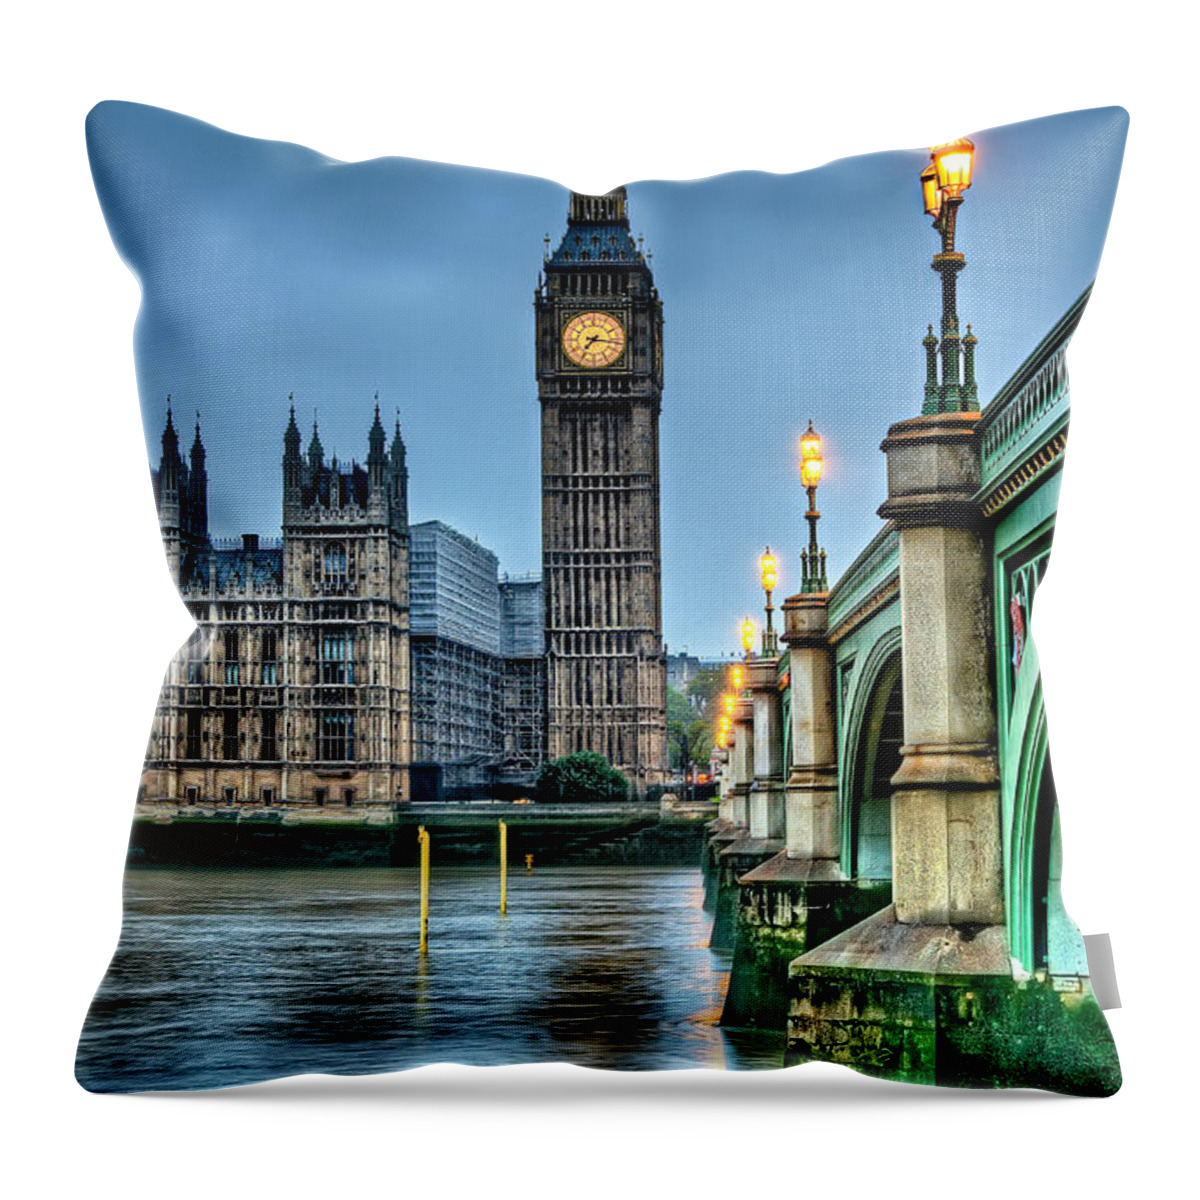 Clock Tower Throw Pillow featuring the photograph Big Ben In London At Dawn by Francisco Diez Photography